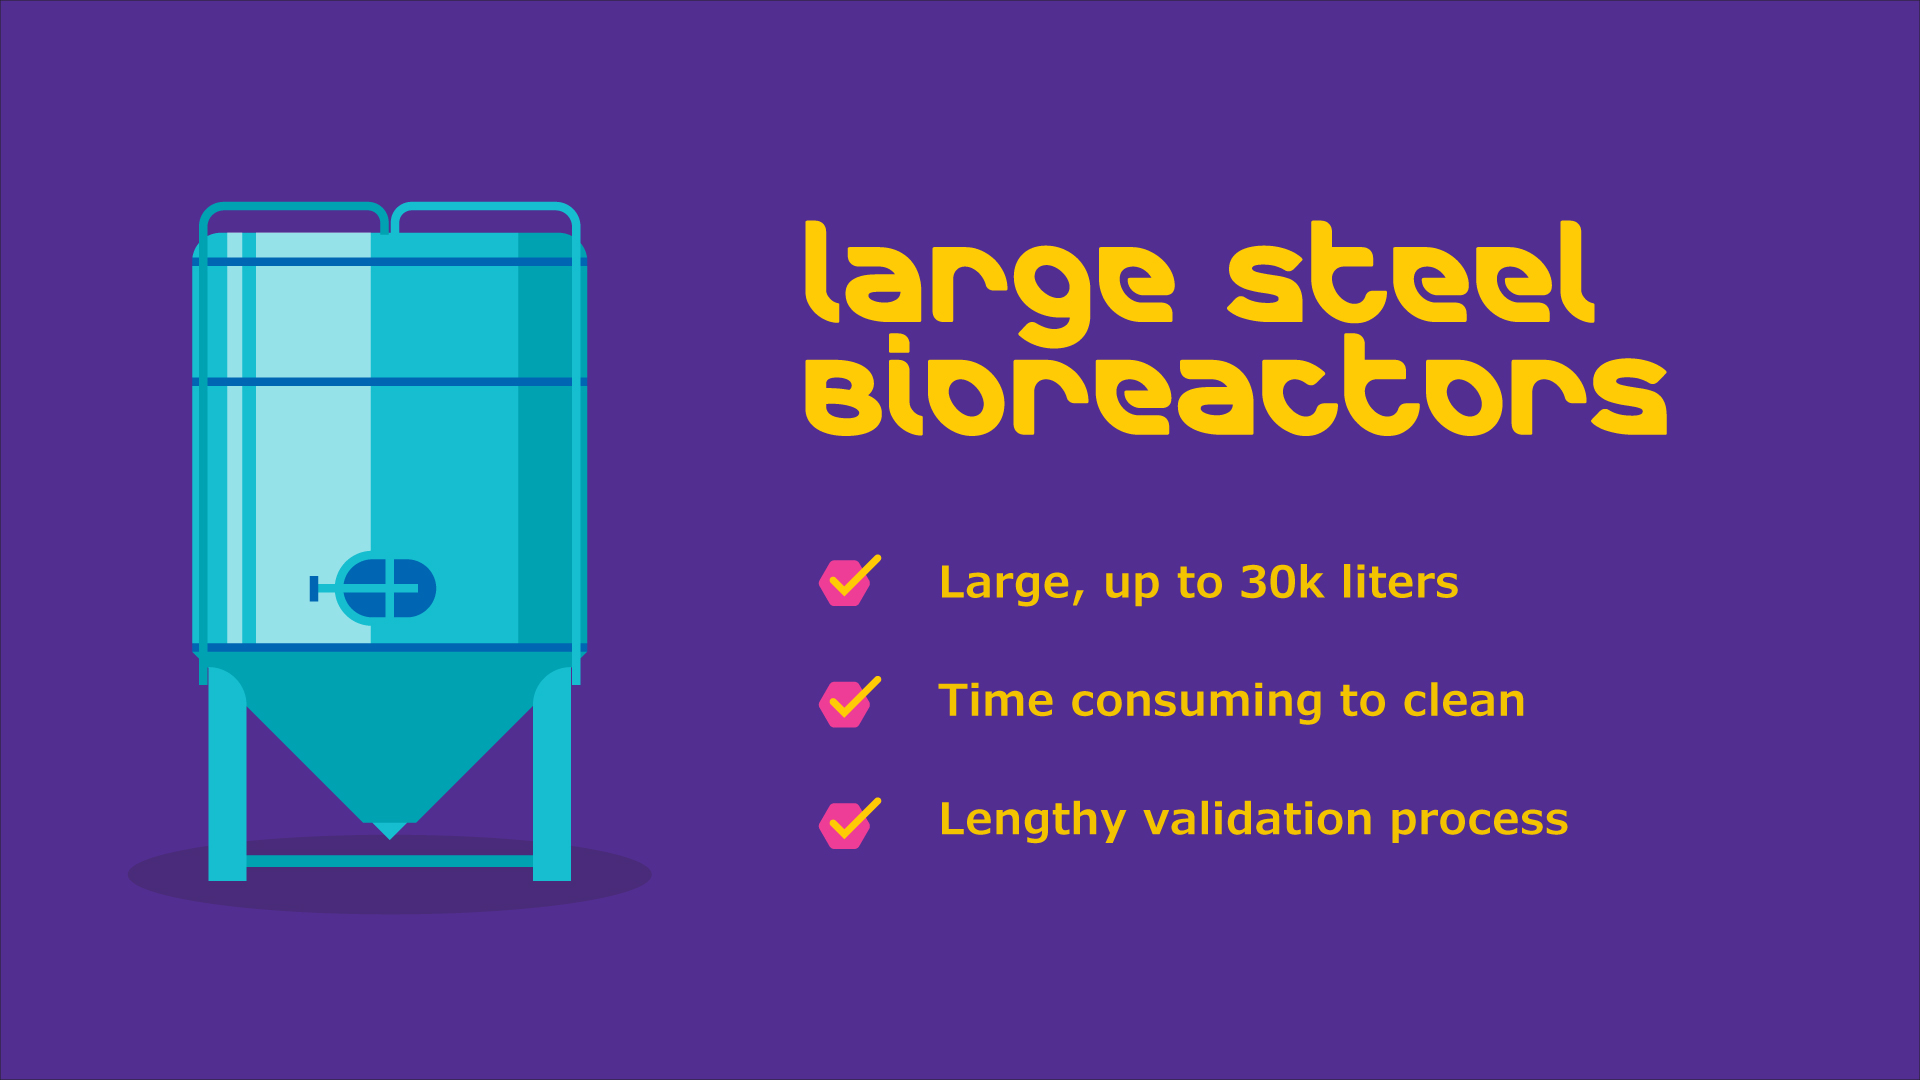 illustrated bioreactor on a purple background